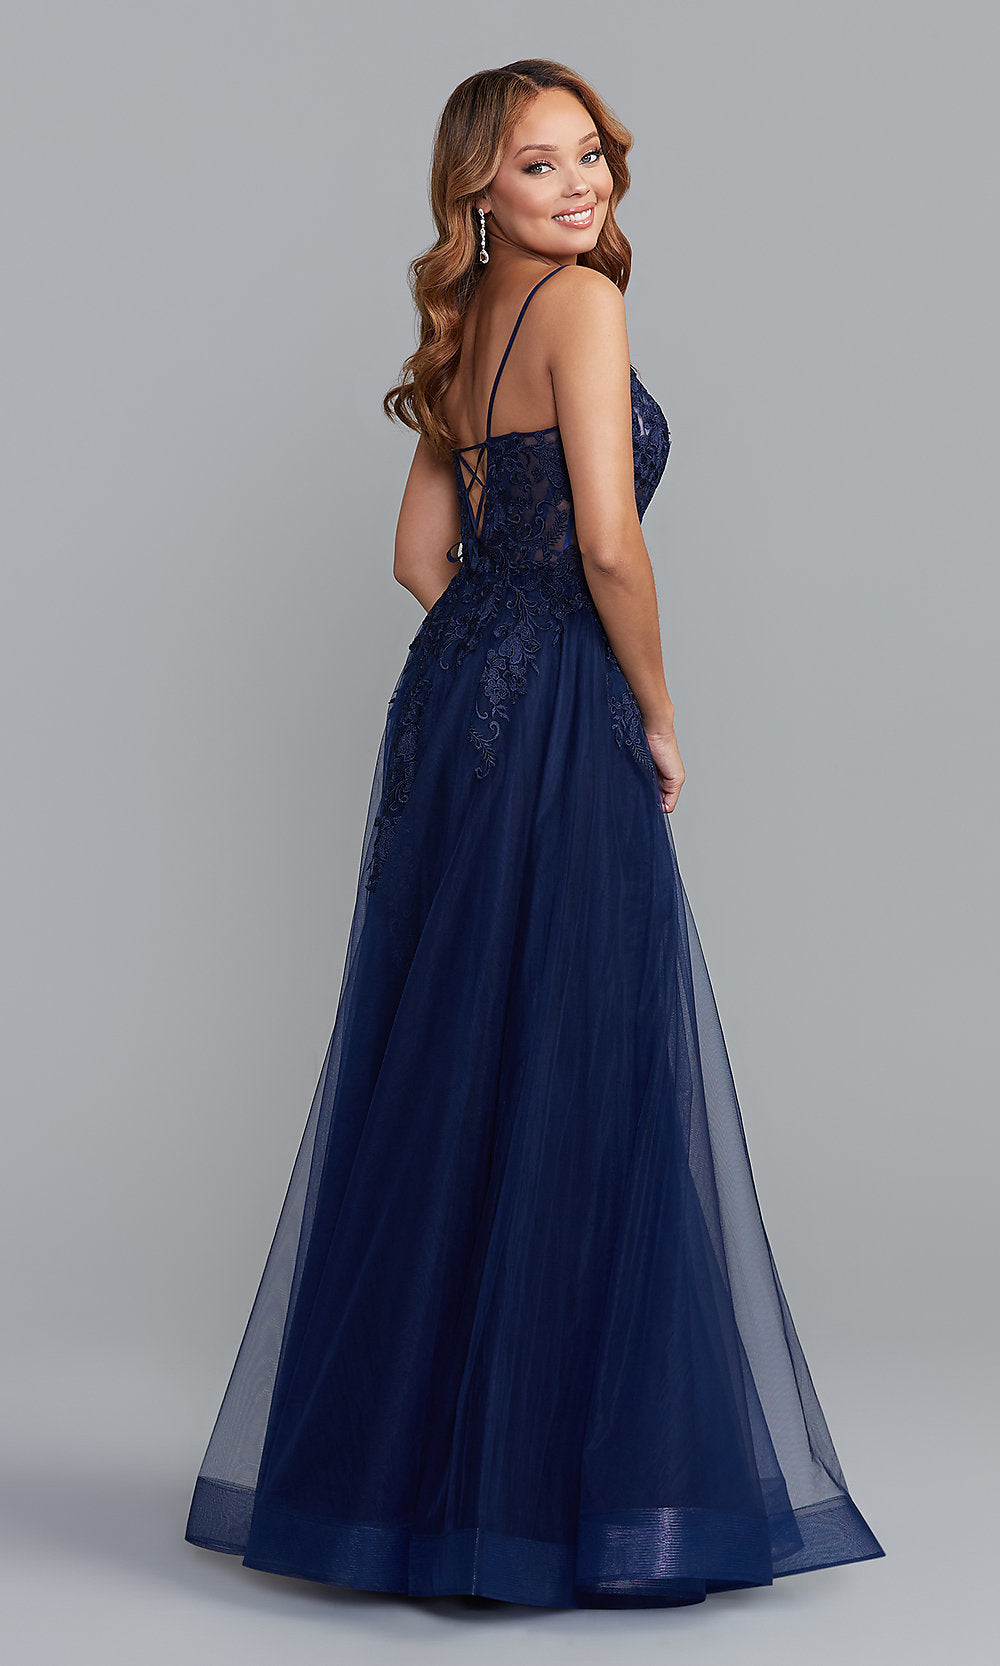  Embroidered Sheer-Bodice Long Blue Prom Dress